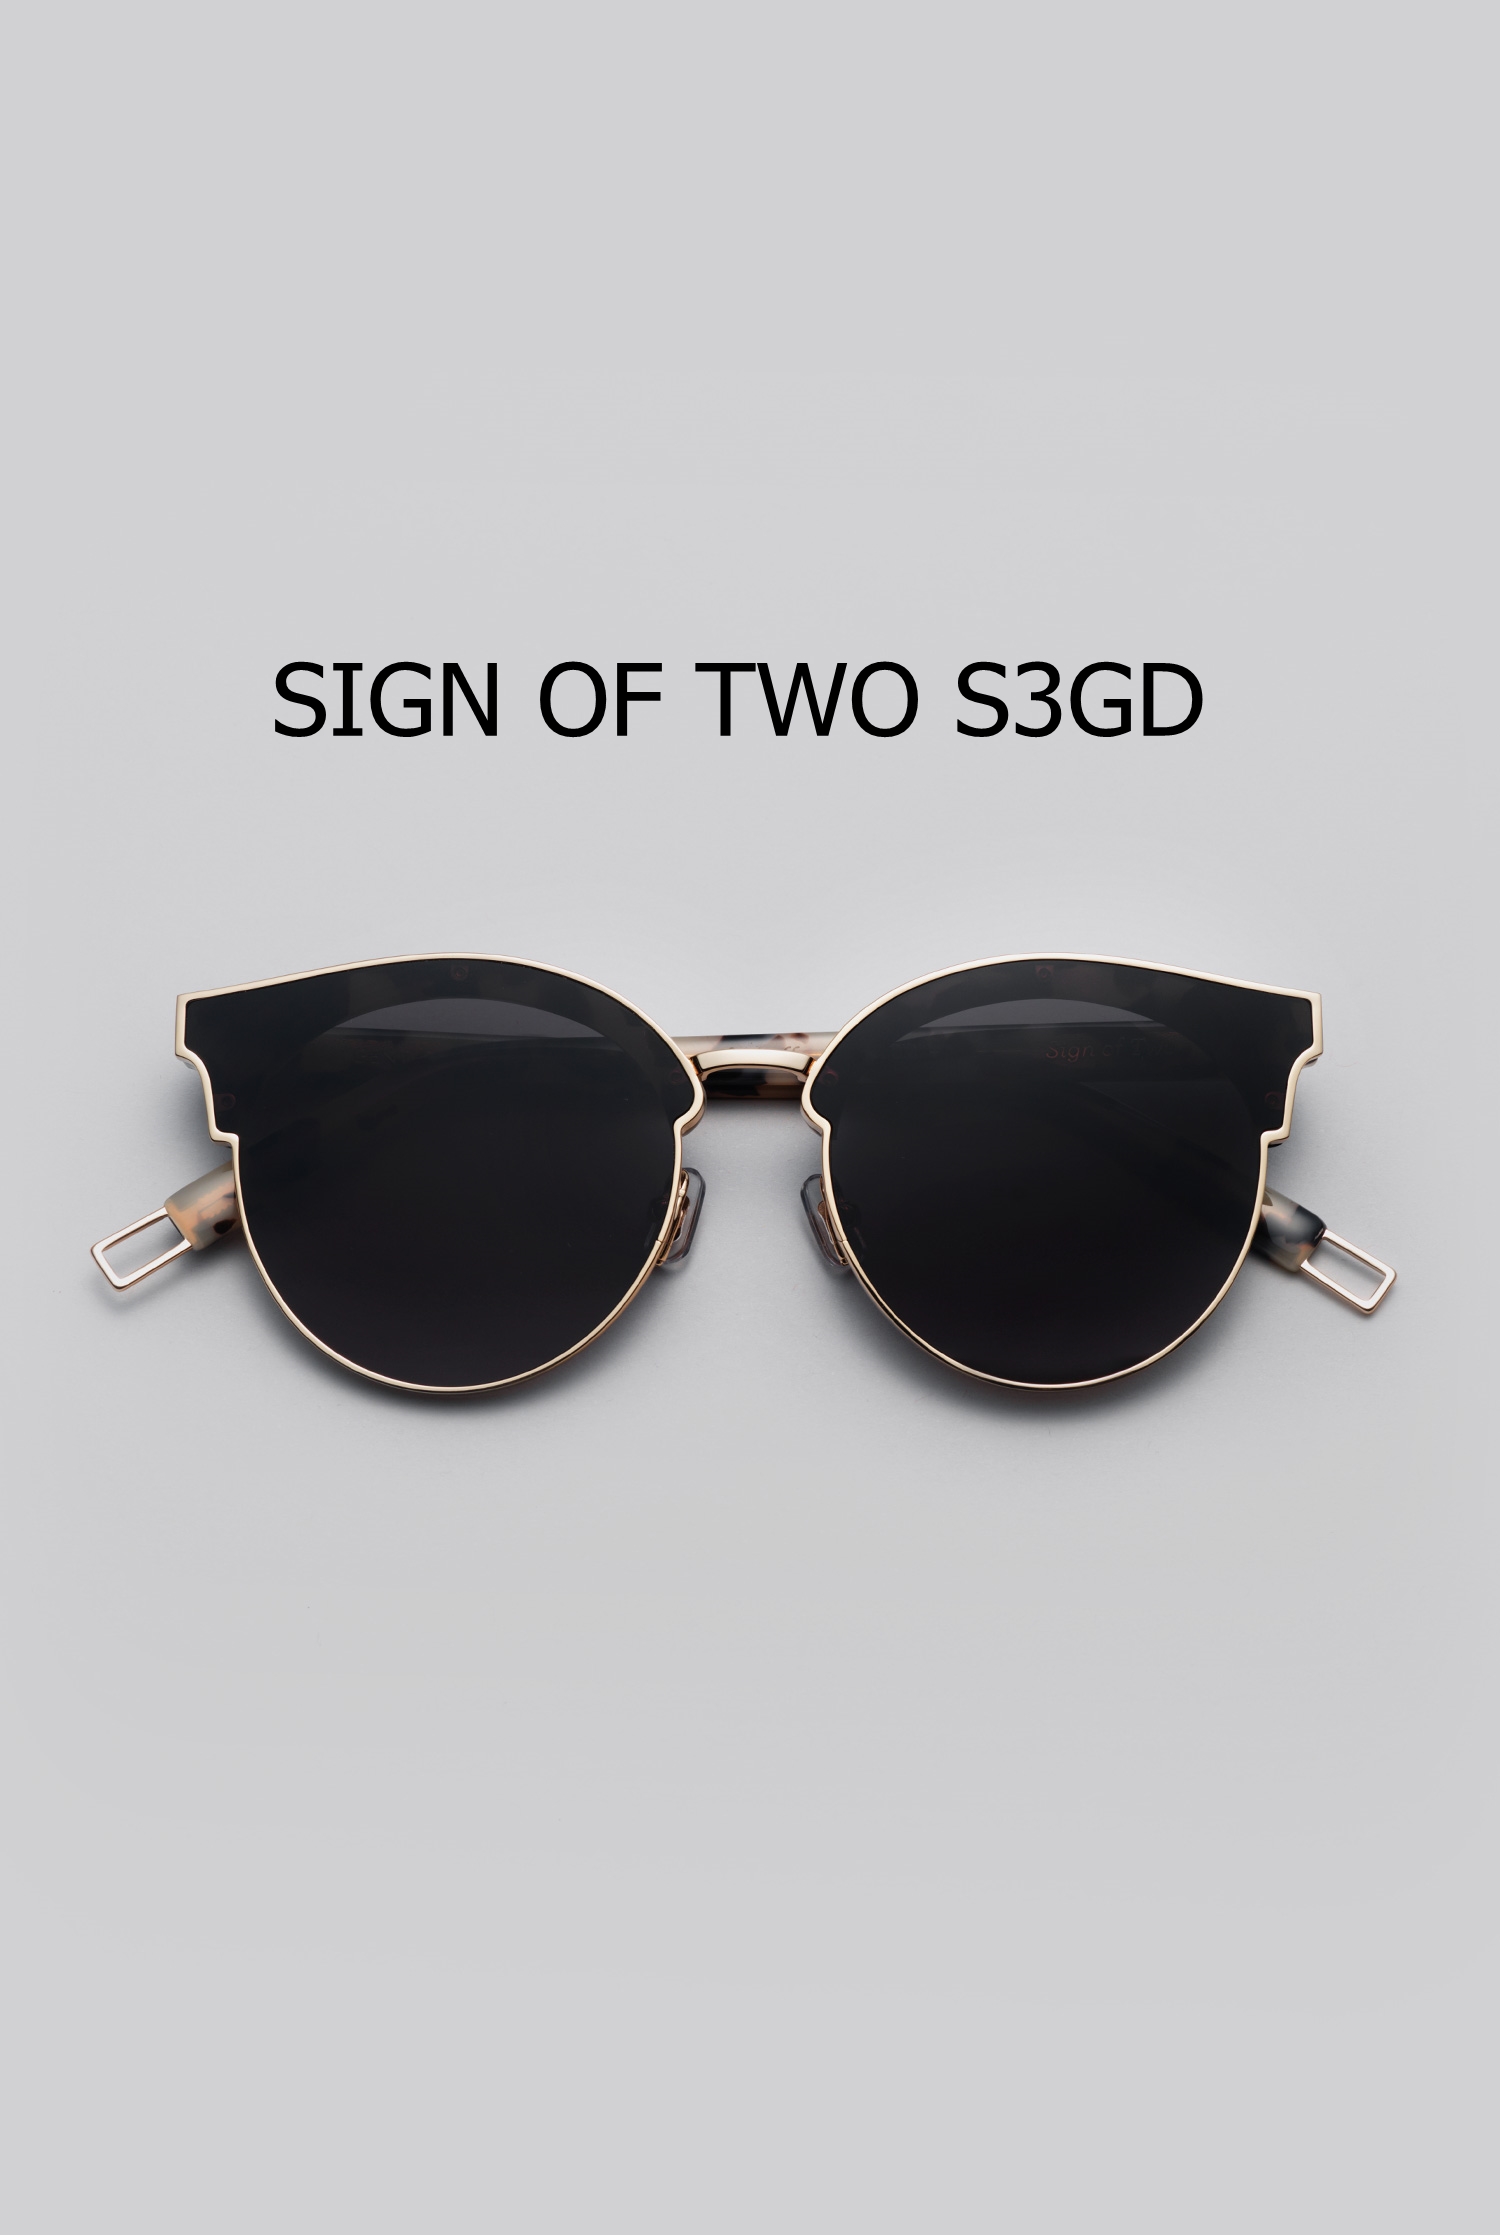 SIGN OF TWO S3GD 